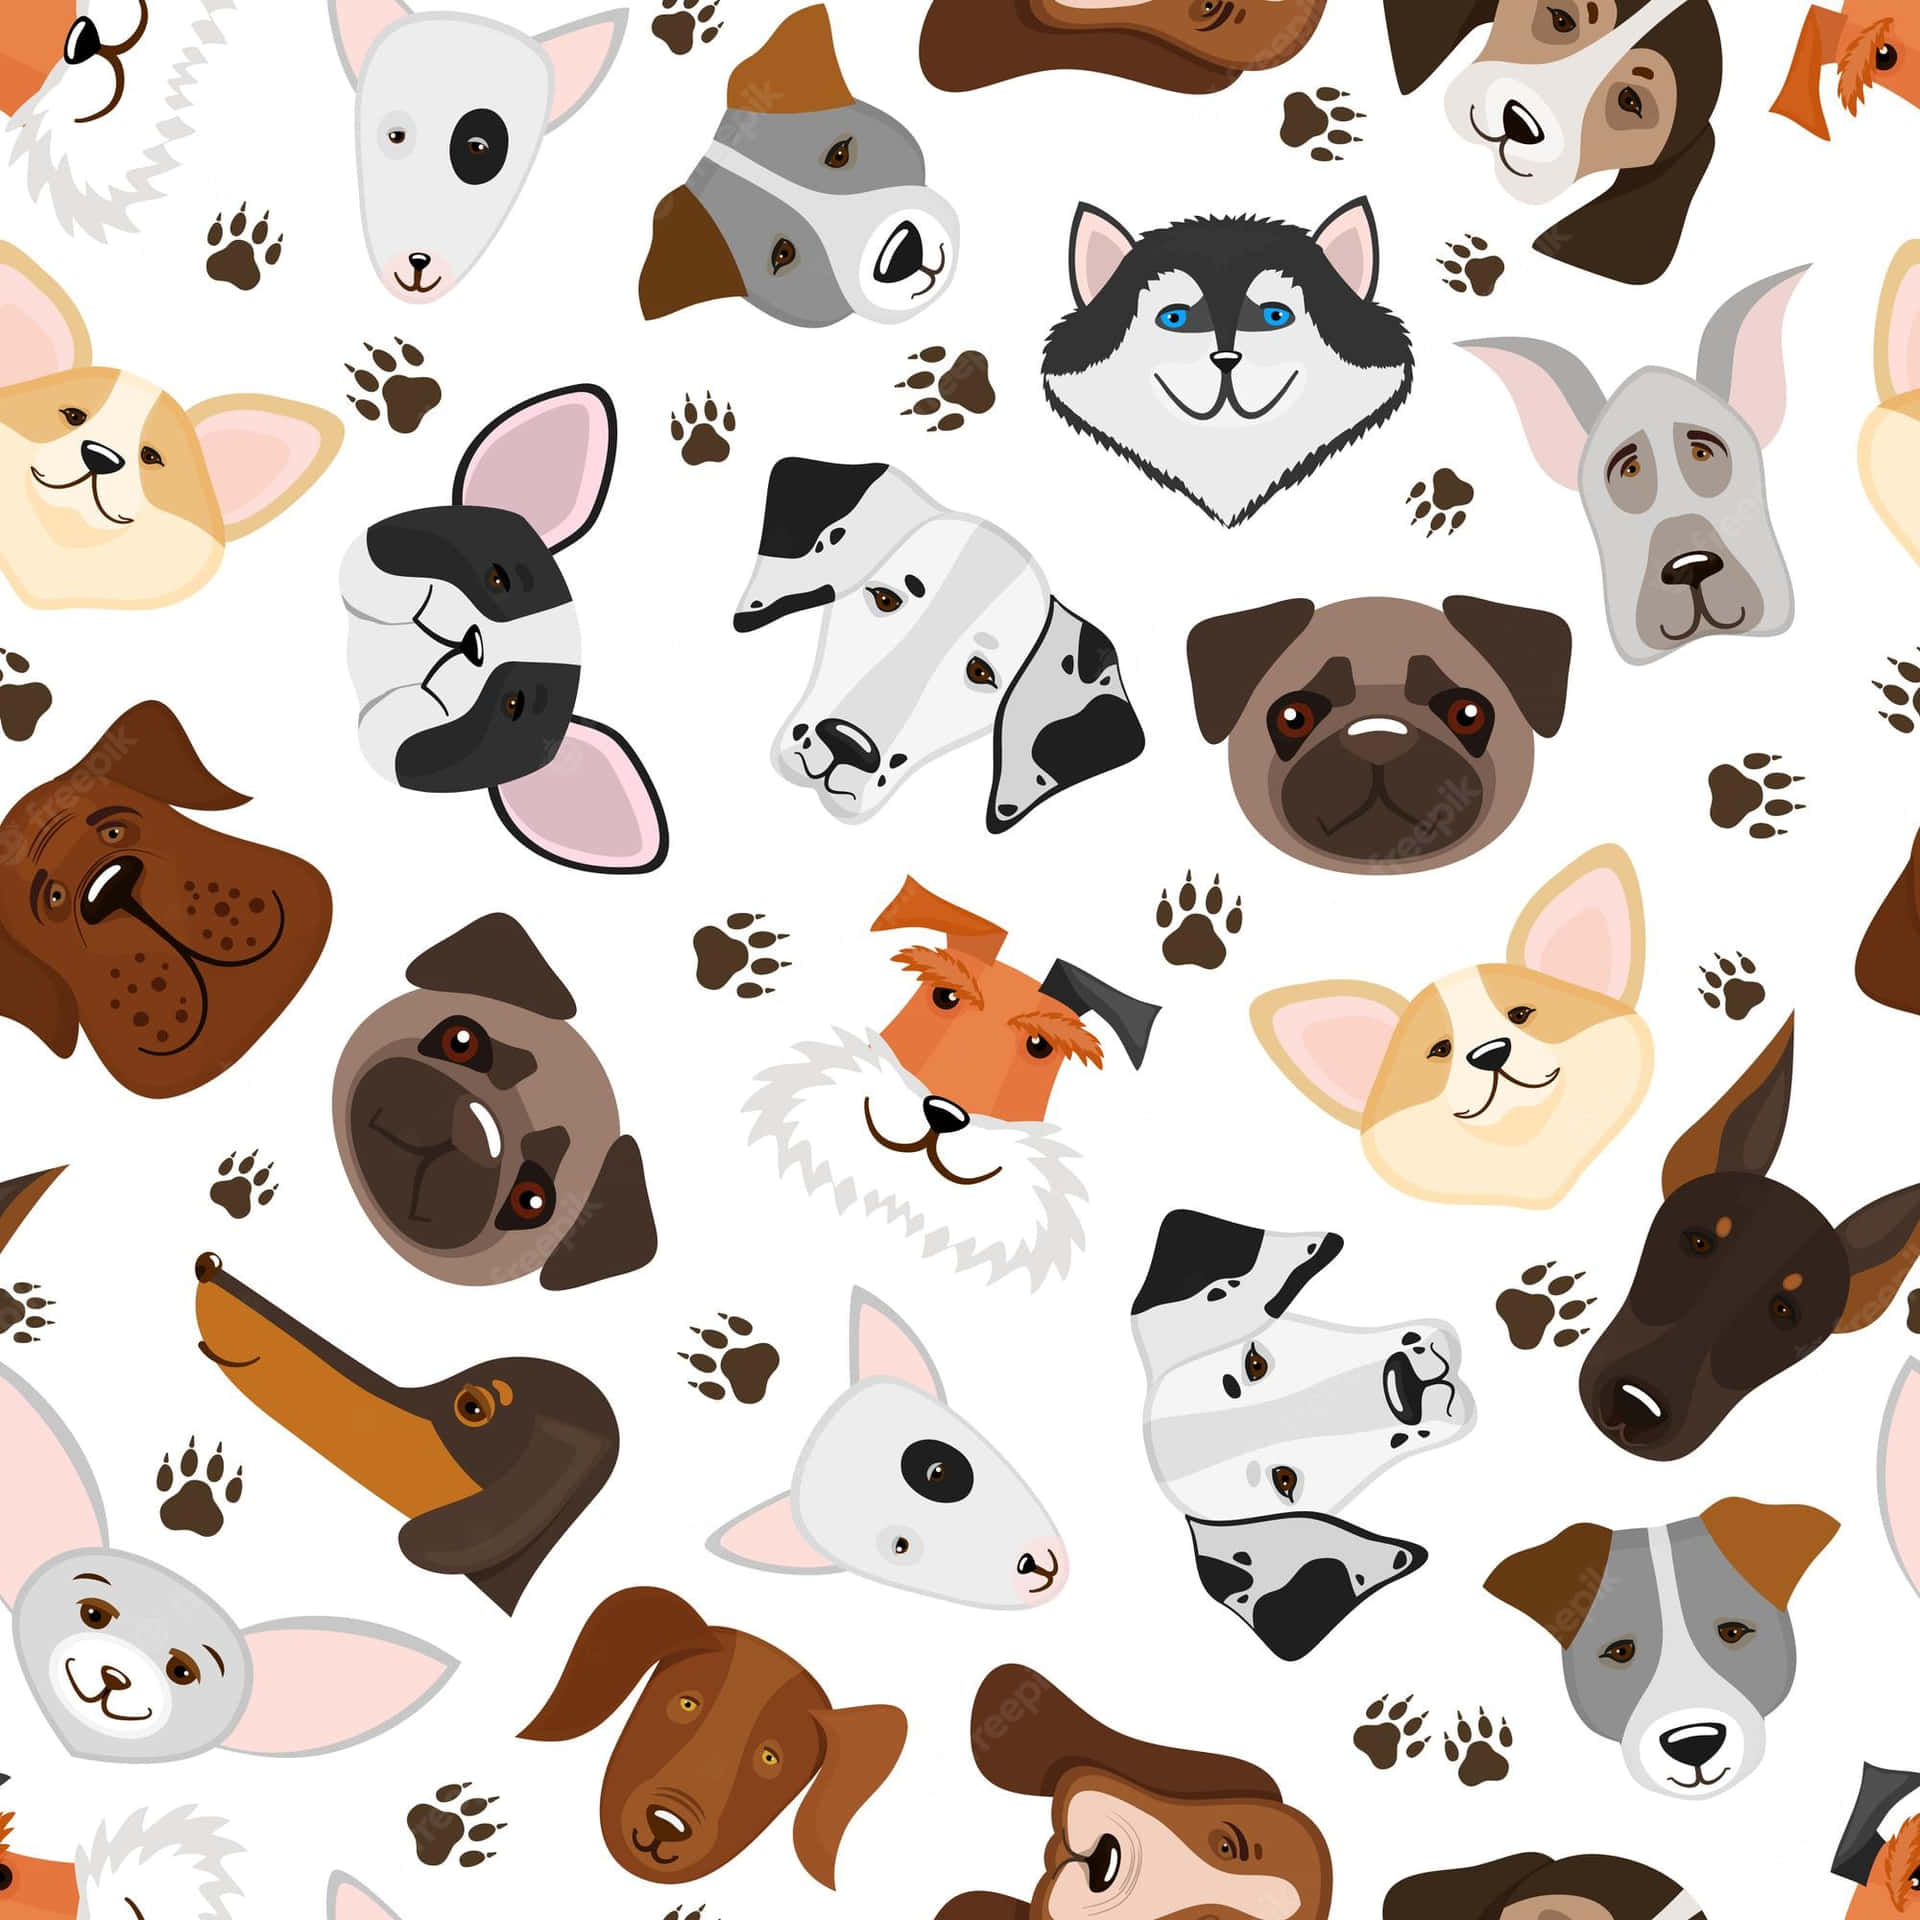 A Pattern Of Dogs With Paw Prints On A White Background